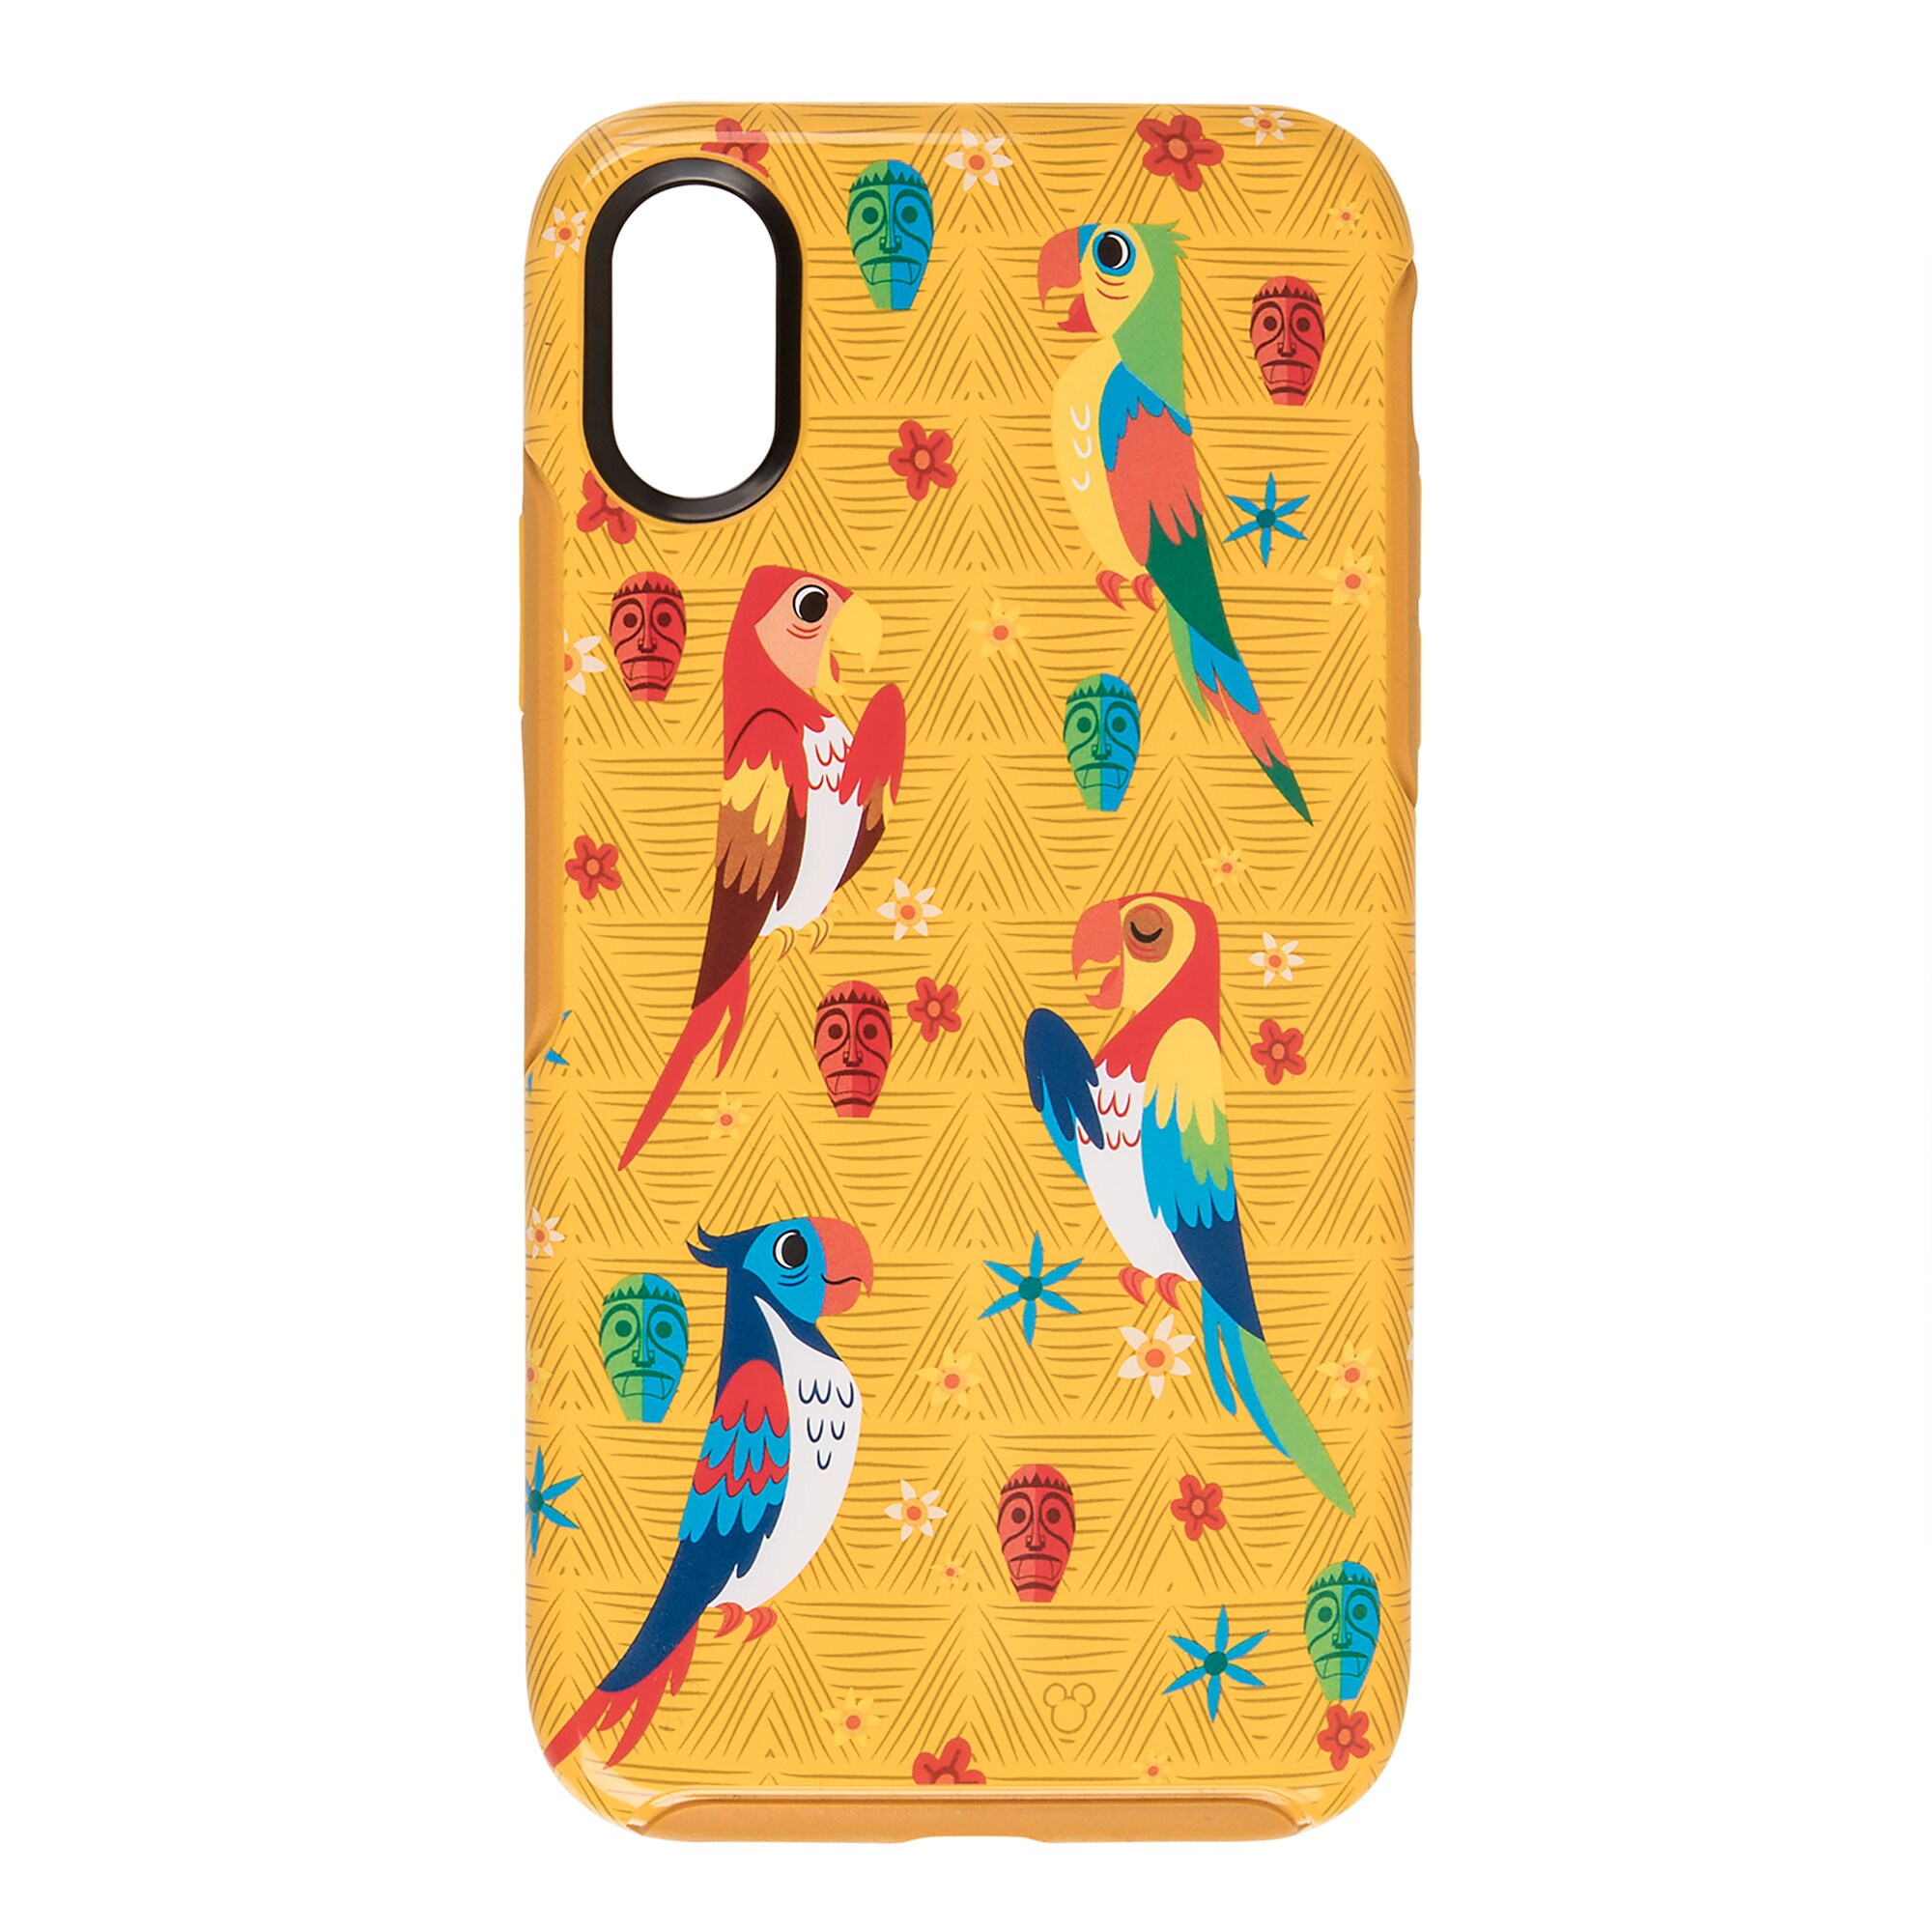 Enchanted Tiki Room iPhone X/Xs Case by OtterBox